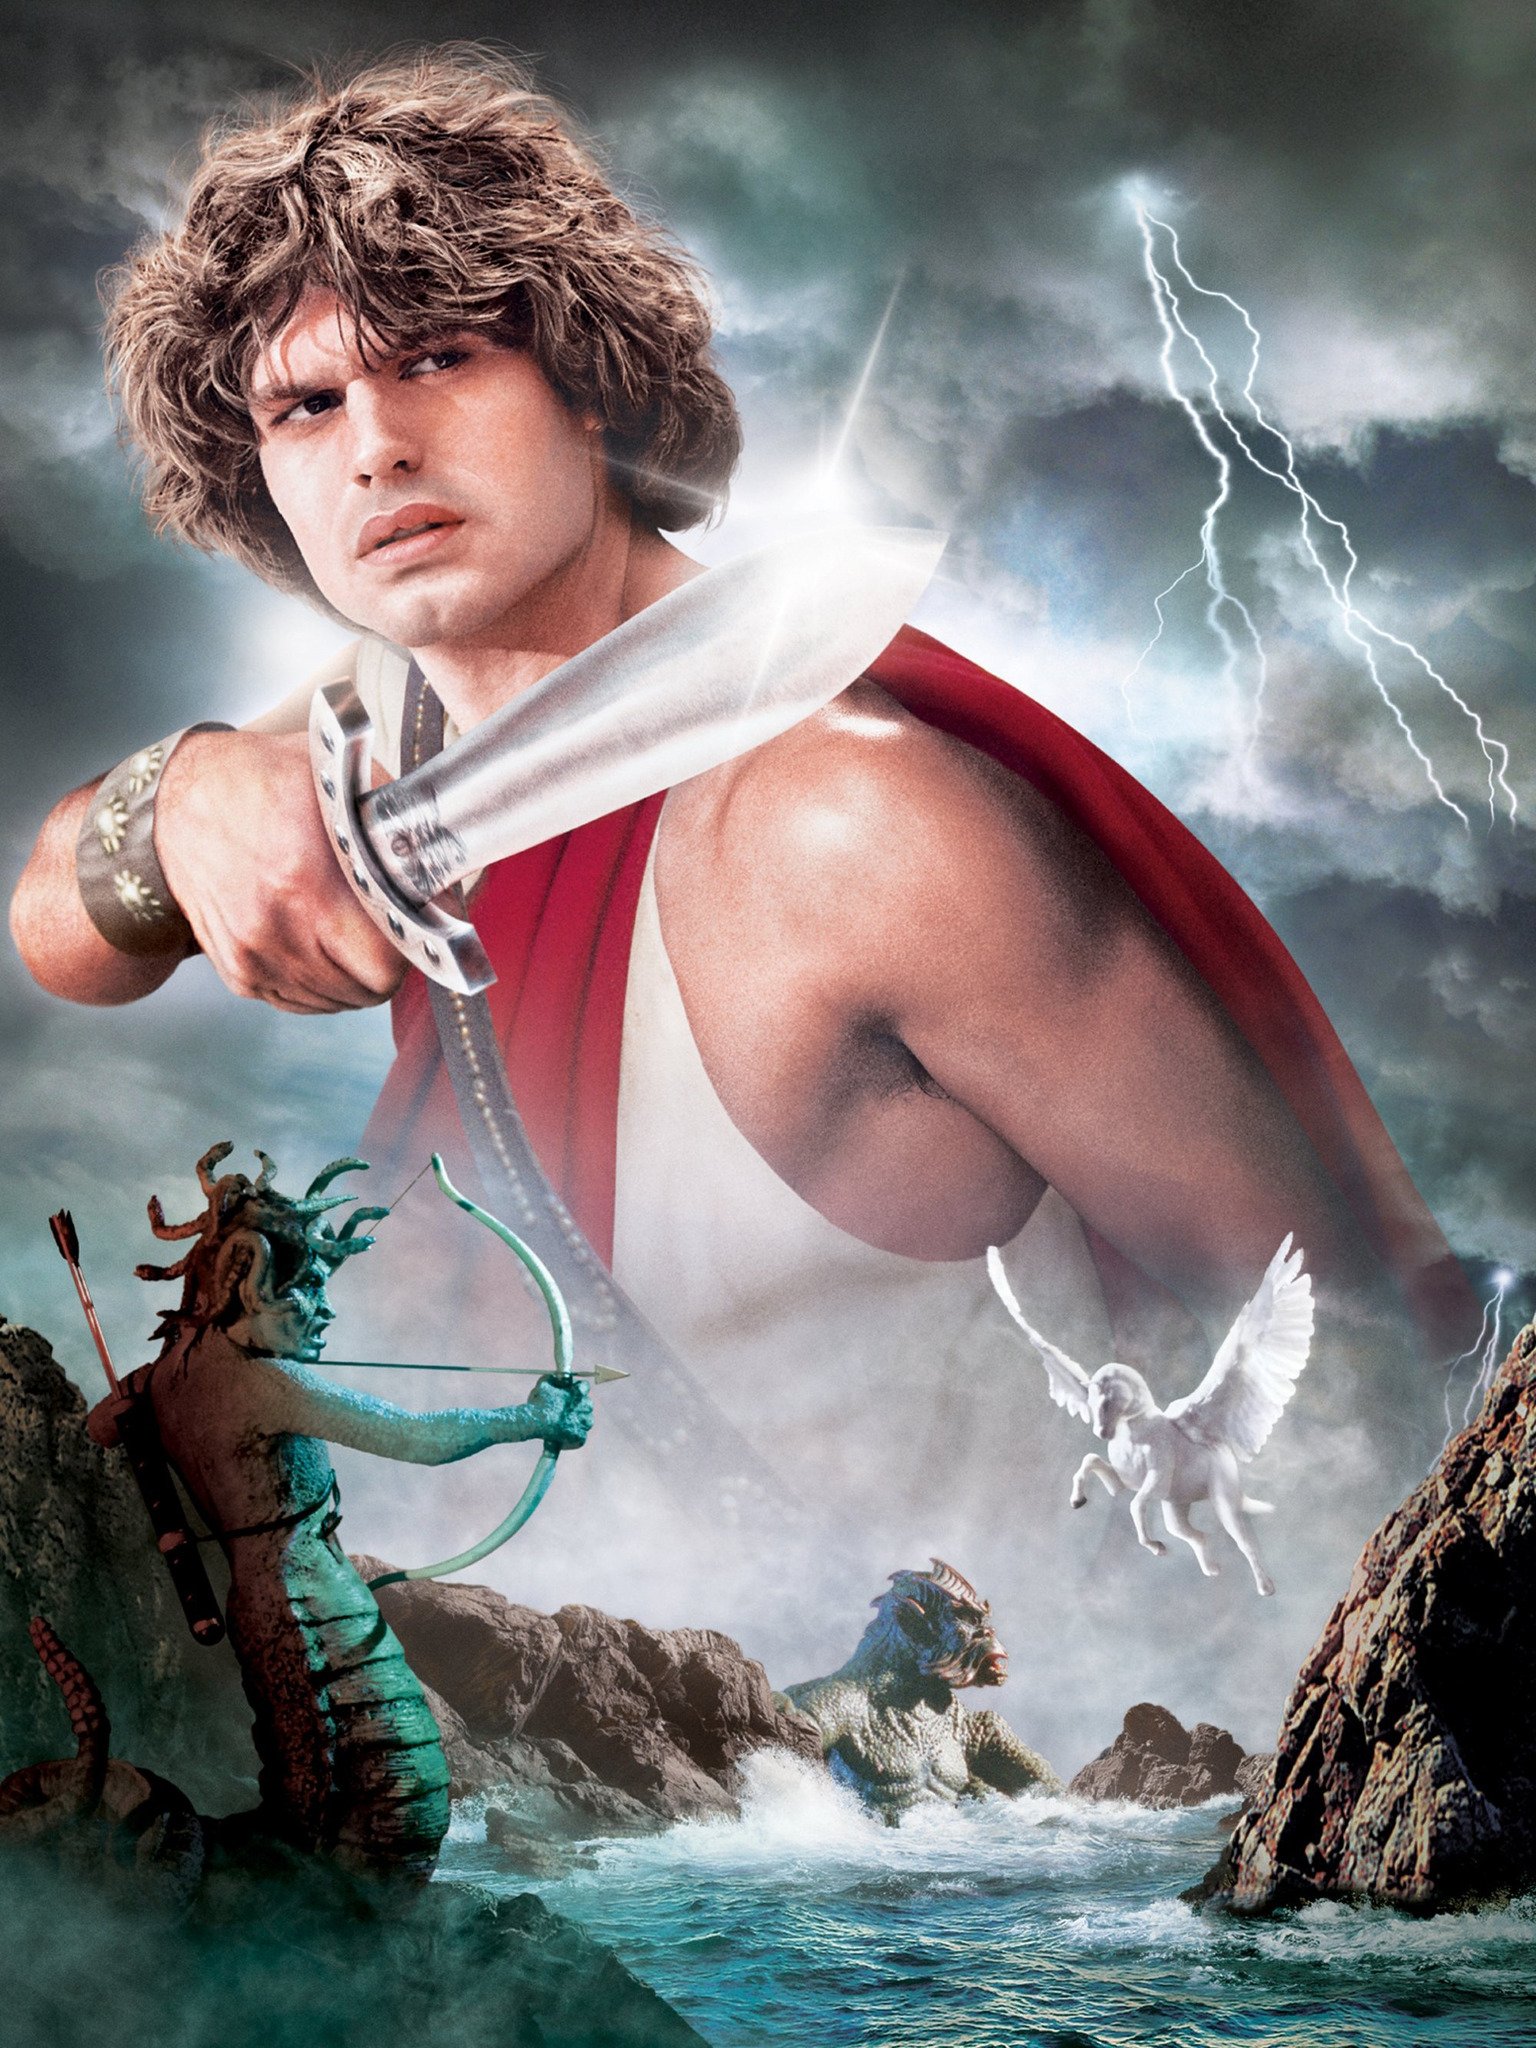 Gay Clash Of The Titans Porn - Clash of the Titans - Rotten Tomatoes